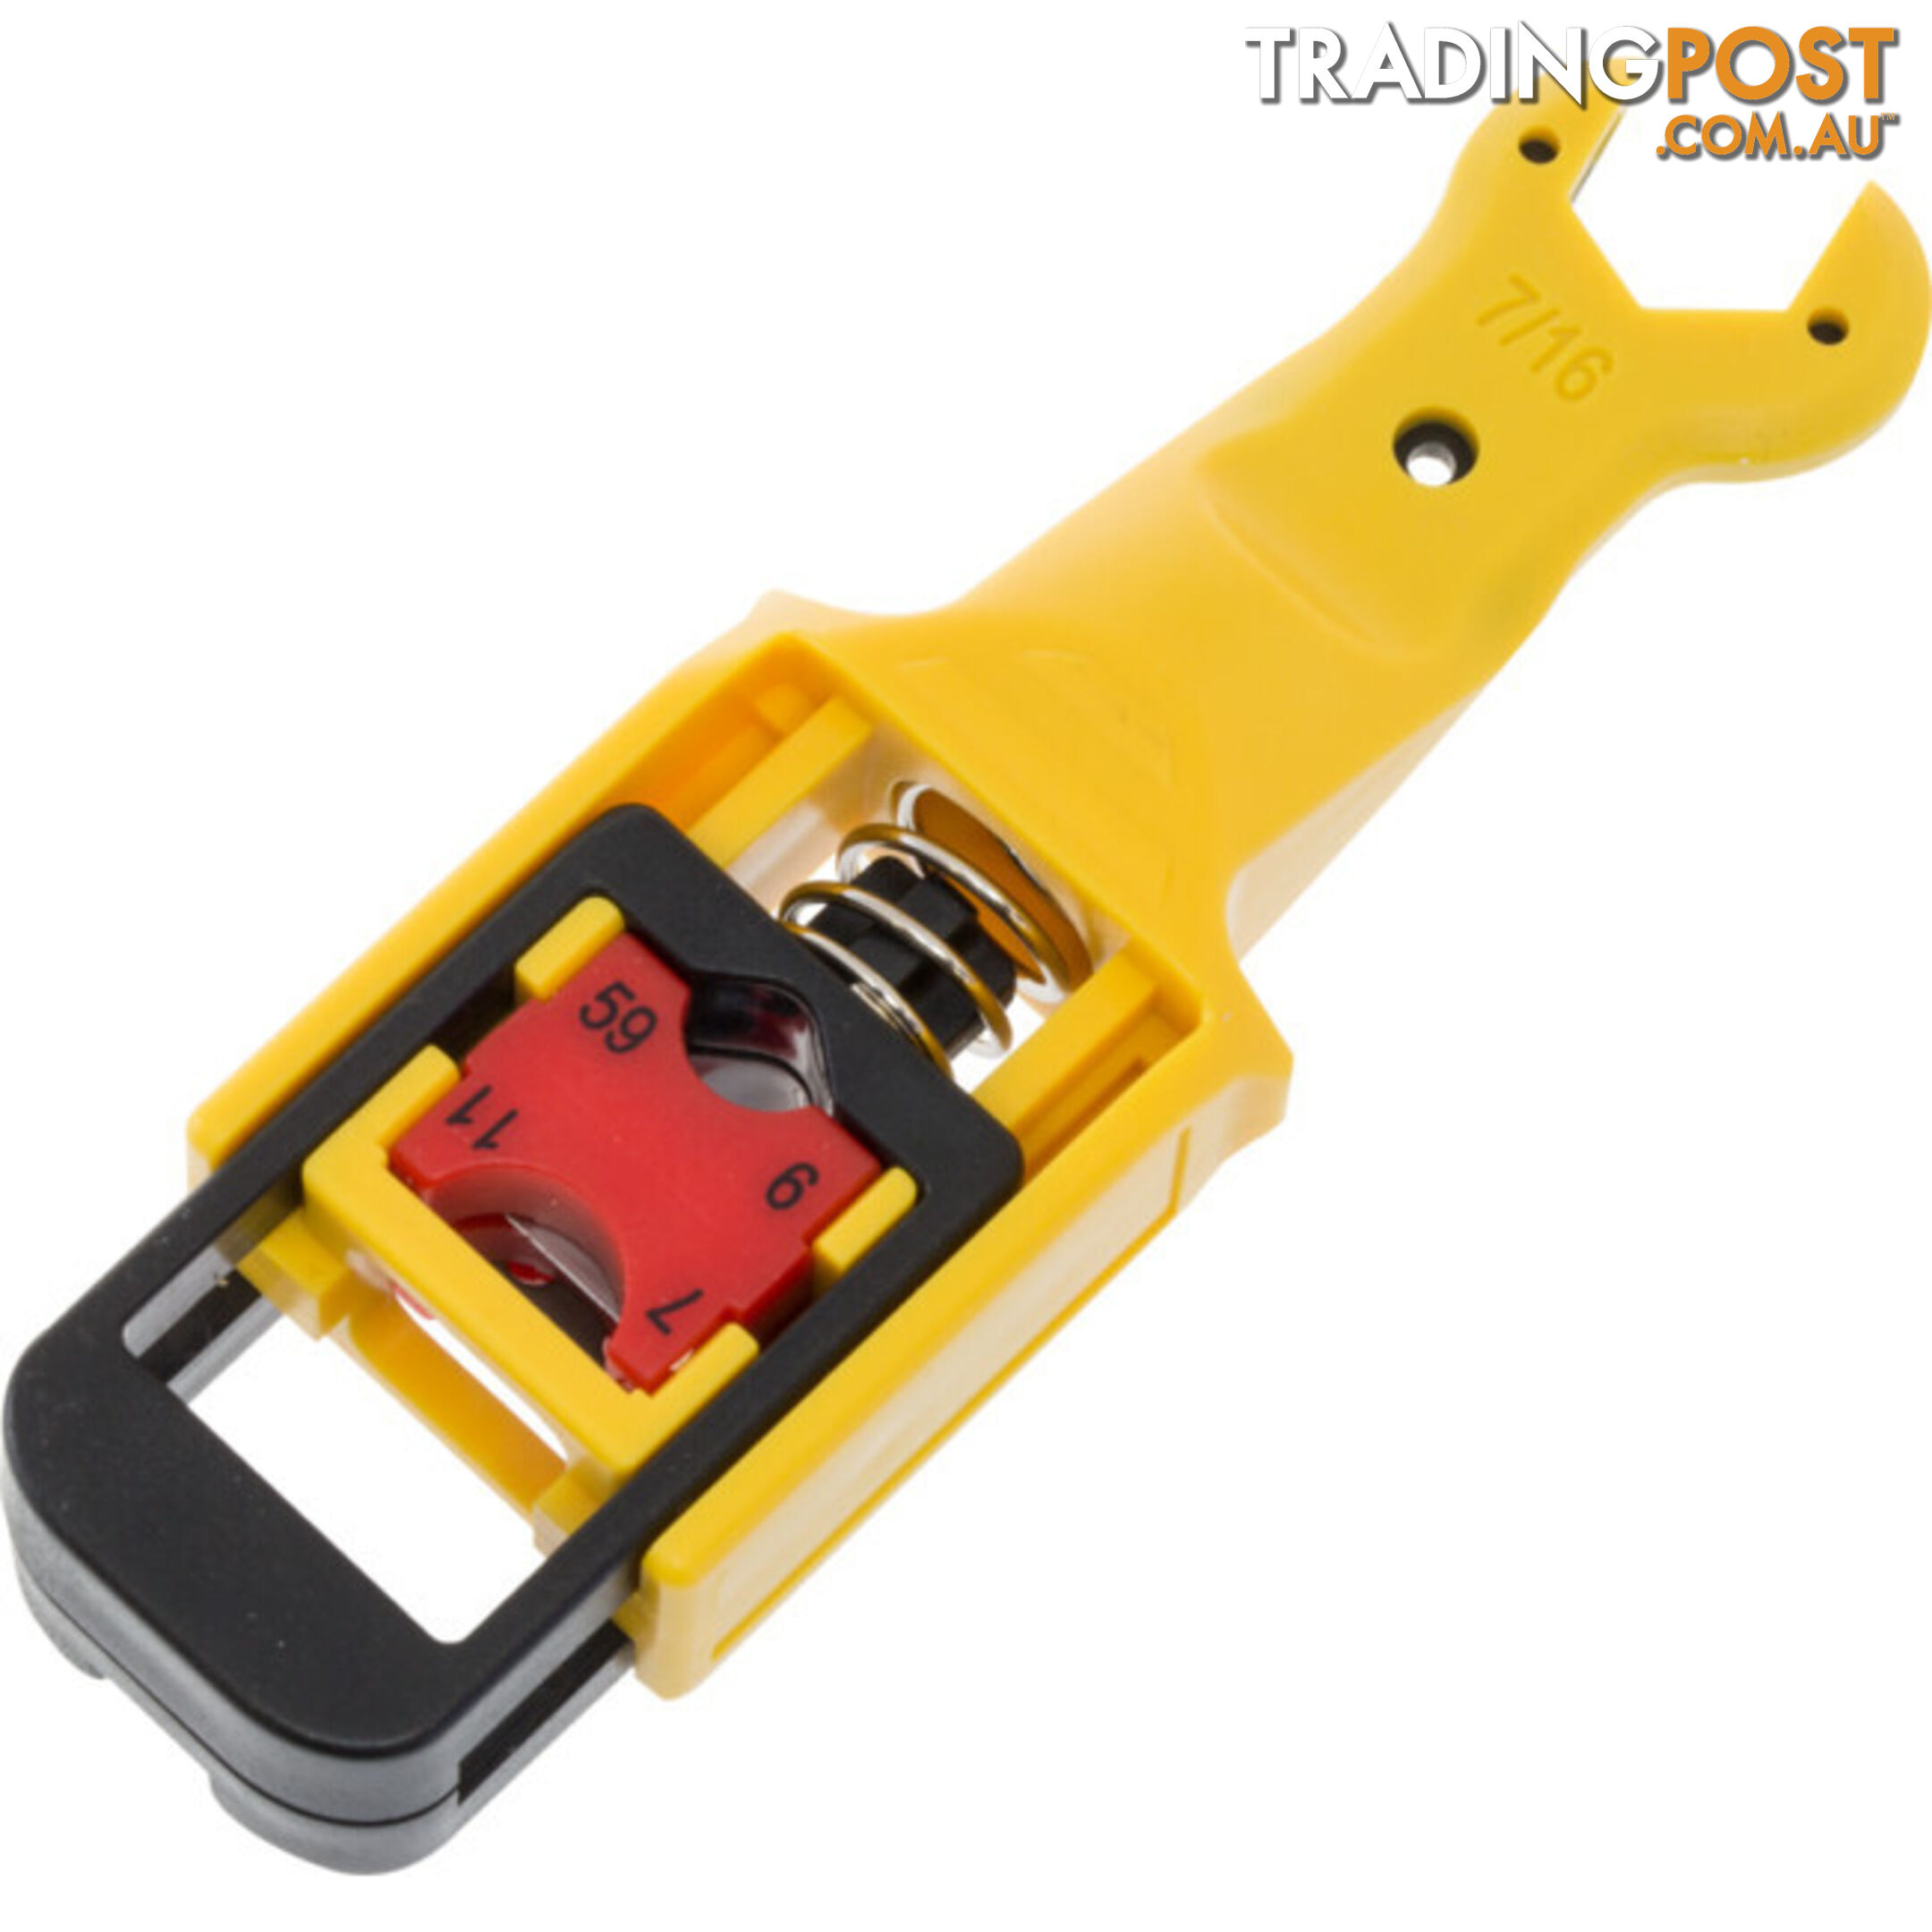 HT363 COAXIAL CABLE WRENCH STRIPPER